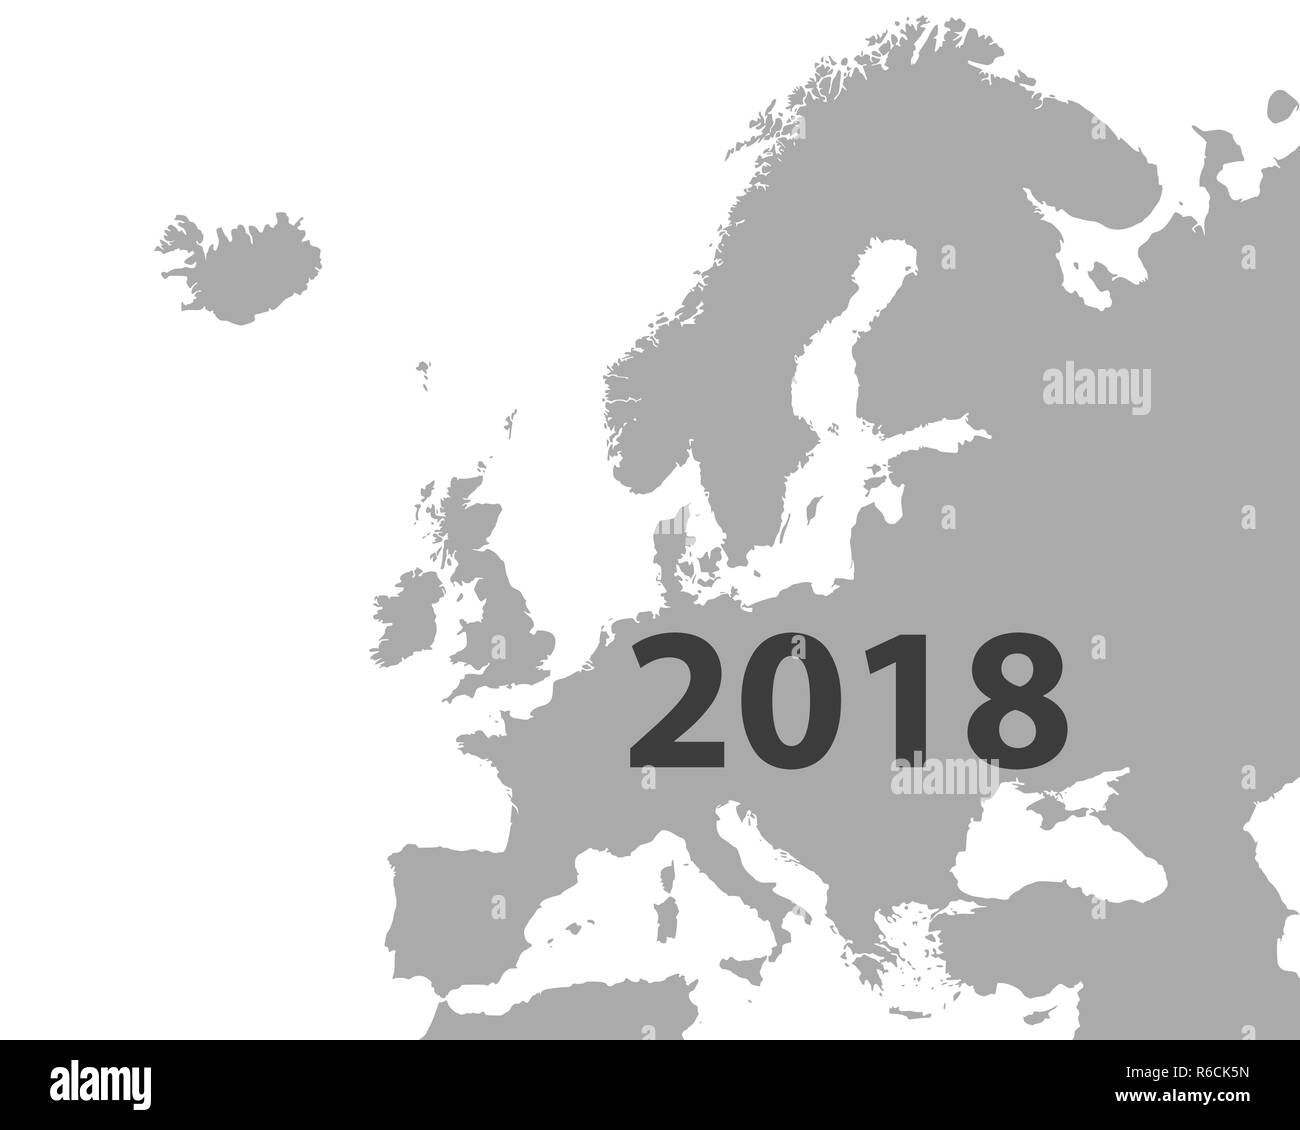 map of europe 2018 Stock Photo